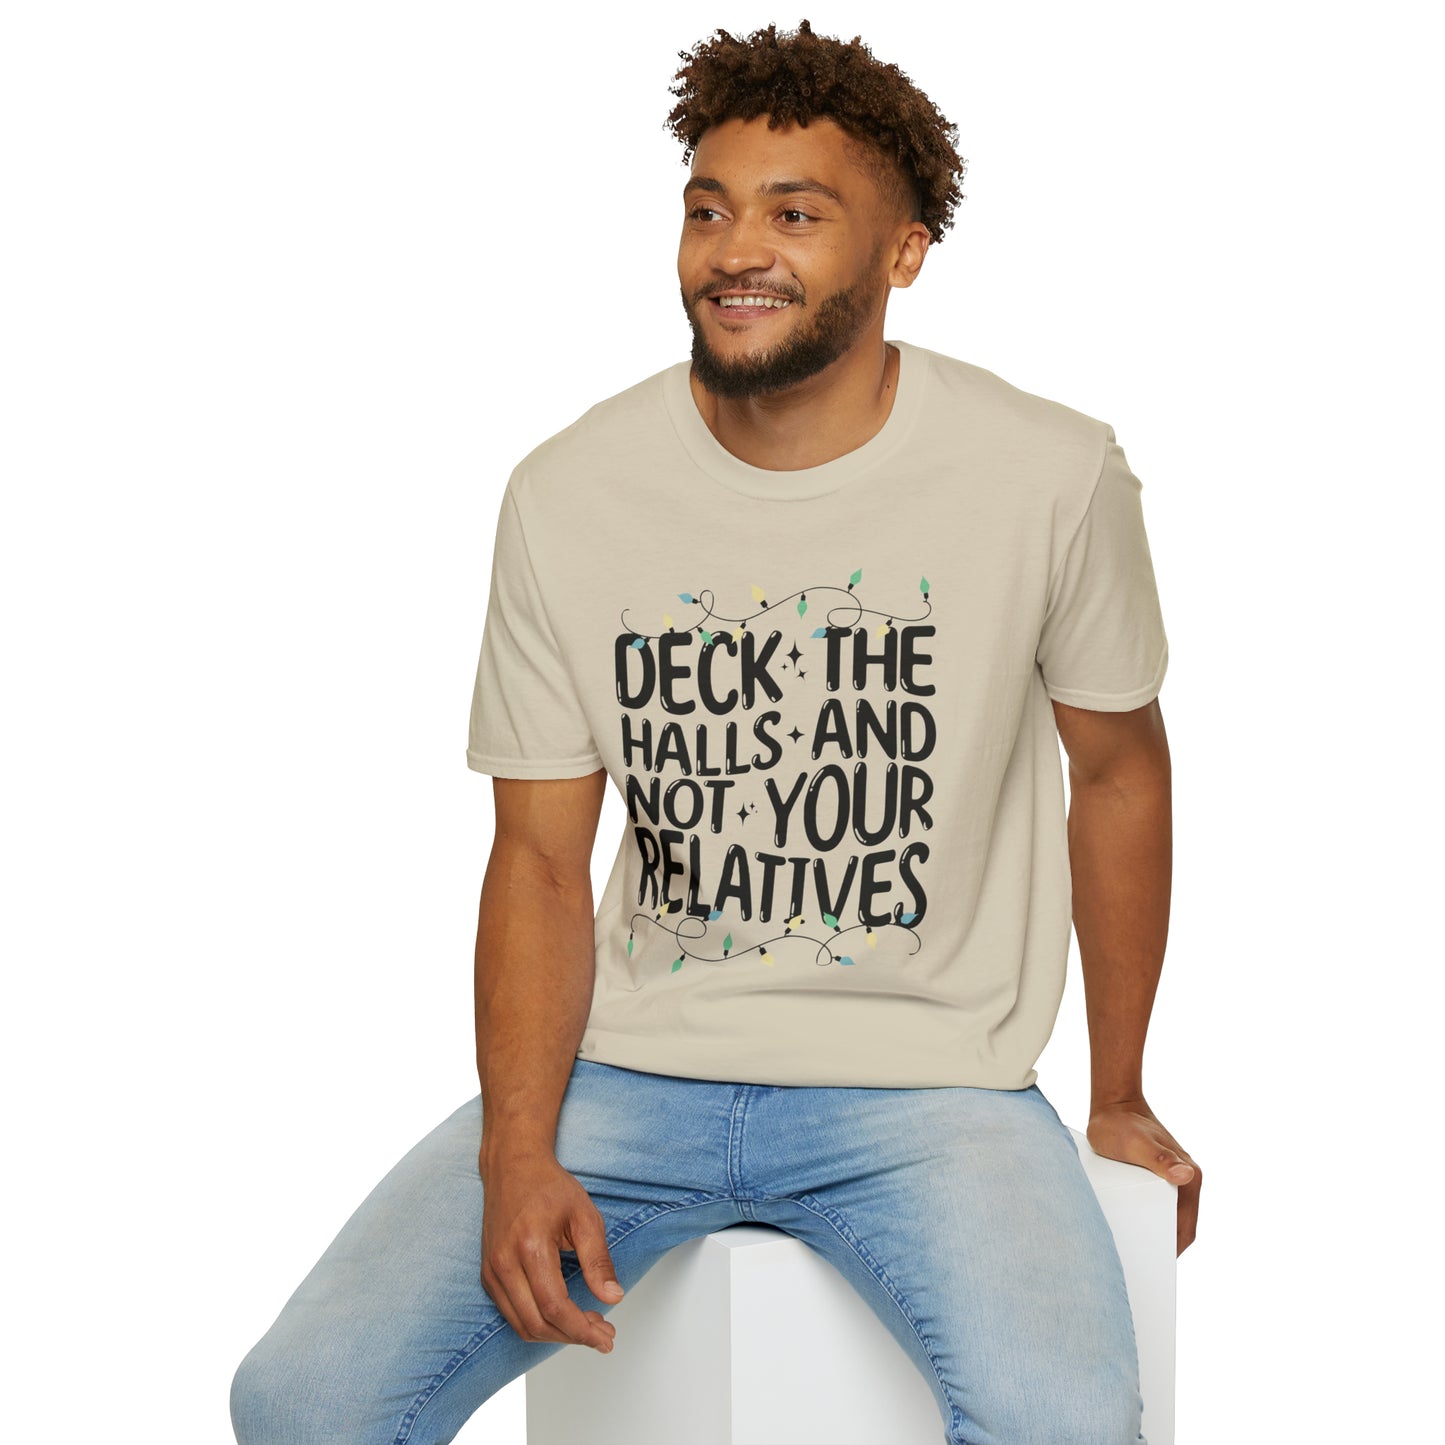 Deck The Halls-Not Your Relatives T-Shirt